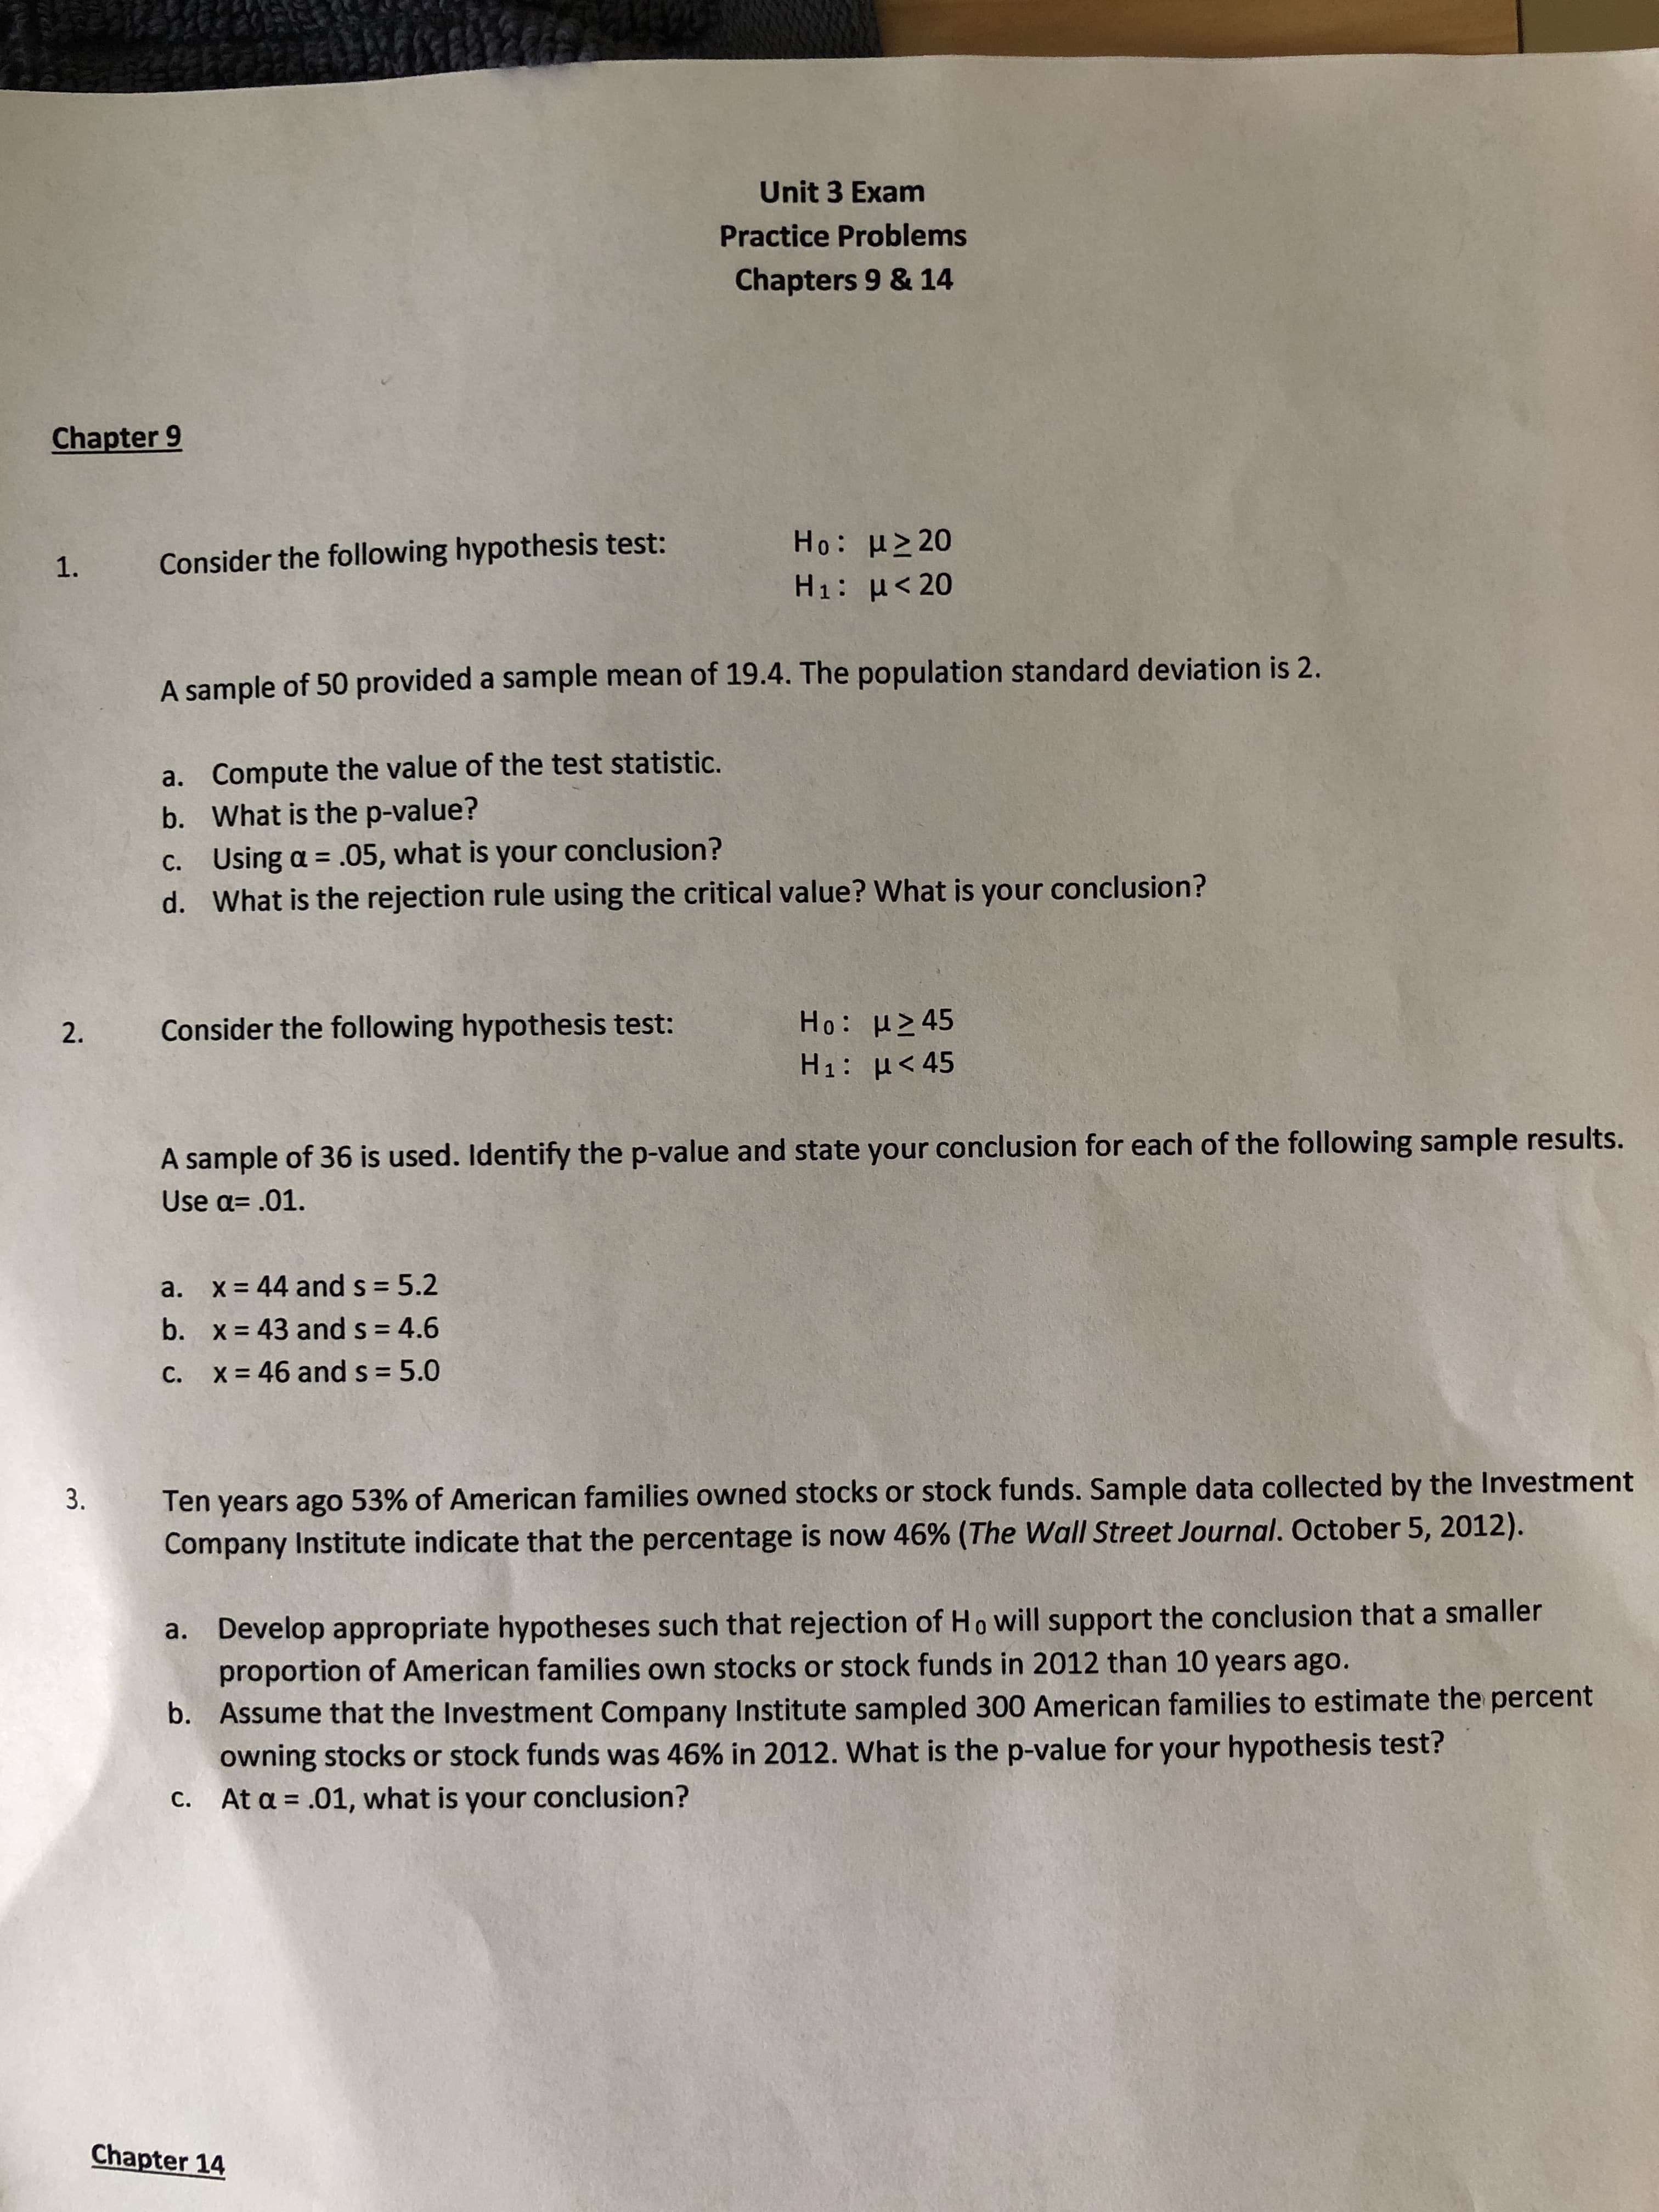 Unit 3 Exam
Practice Problems
Chapters 9 & 14
Chapter 9
Ho: μ20
Consider the following hypothesis test:
1.
H1: H20
A sample of 50 provided a sample mean of 19.4. The population standard deviation is 2.
a. Compute the value of the test statistic.
b. What is the p-value?
c. Using a .05, what is your conclusion?
d. What is the rejection rule using the critical value? What is your conclusion?
Ho: μ245
Consider the following hypothesis test:
2.
H1: H<45
A sample of 36 is used. Identify the p-value and state your conclusion for each of the following sample results.
Use a= .01.
x=44 and s = 5.2
a.
b.
x 43 and s = 4.6
5.0
x46 and s
C.
Ten years ago 53 % of American families owned stocks or stock funds. Sample data collected by the Investment
Company Institute indicate that the percentage is now 46% (The Wall Street Journal. October 5, 2012).
3.
Develop appropriate hypotheses such that rejection of Ho will support the conclusion that a smaller
proportion of American families own stocks or stock funds in 2012 than 10 years ago.
a.
Assume that the Investment Company Institute sampled 300 American families to estimate the percent
owning stocks or stock funds was 46% in 2012. What is the p-value for your hypothesis test?
At a .01, what is your conclusion?
b.
C.
Chapter 14
